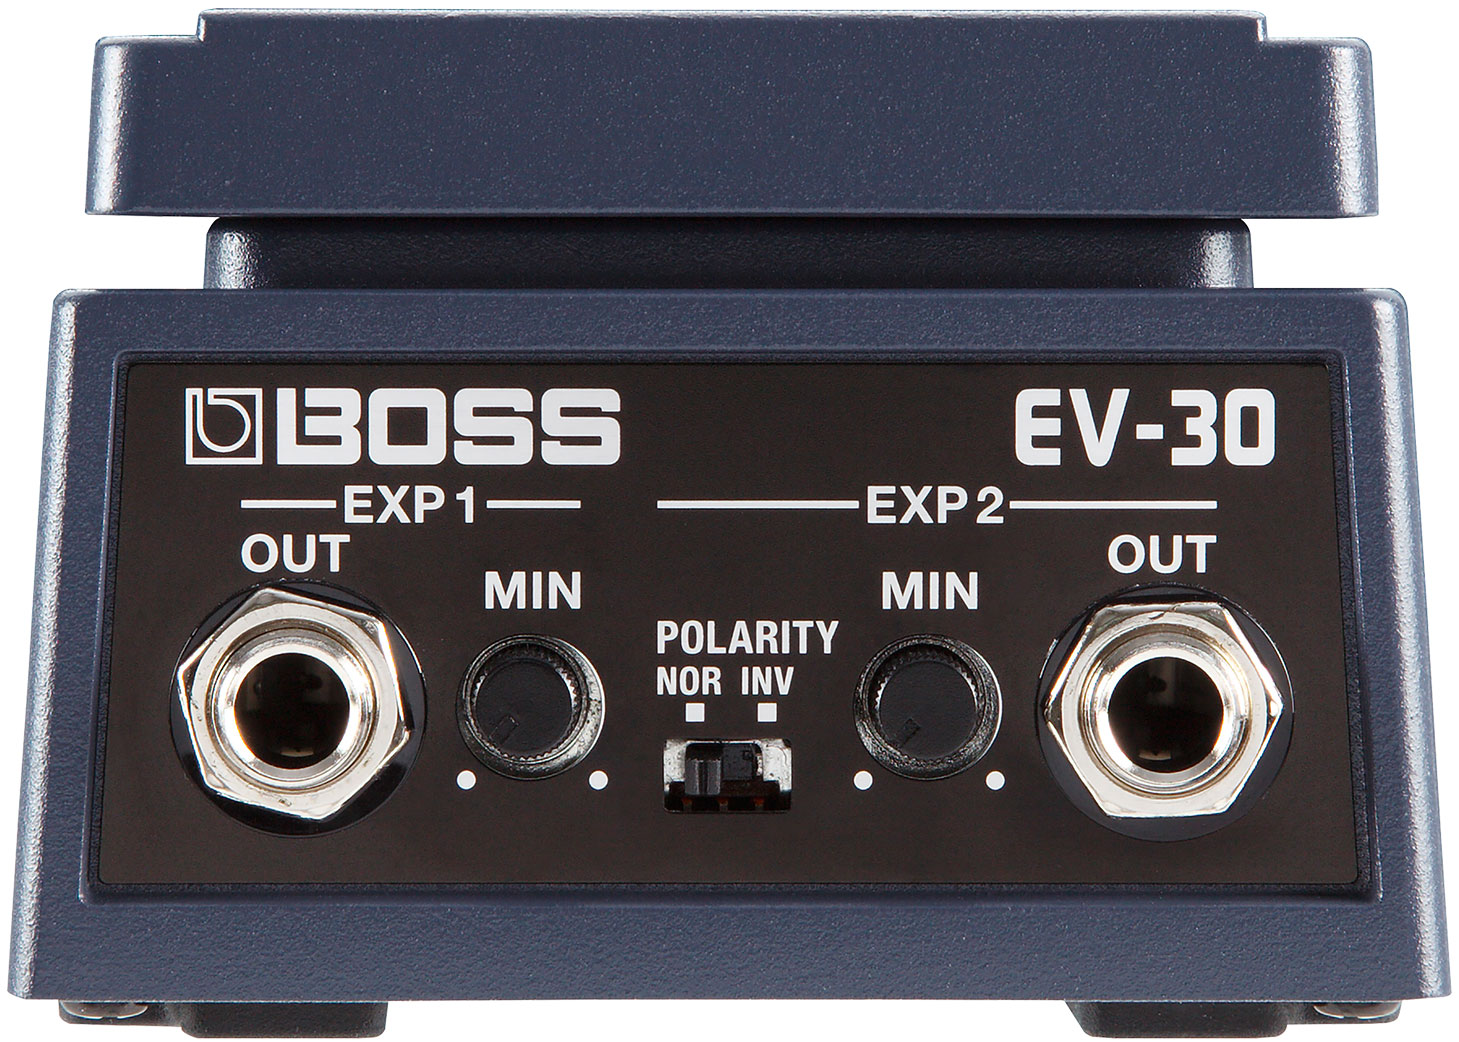 Boss Ev-30 Dual Expression Pedal - Volume, boost & expression effect pedal - Variation 2